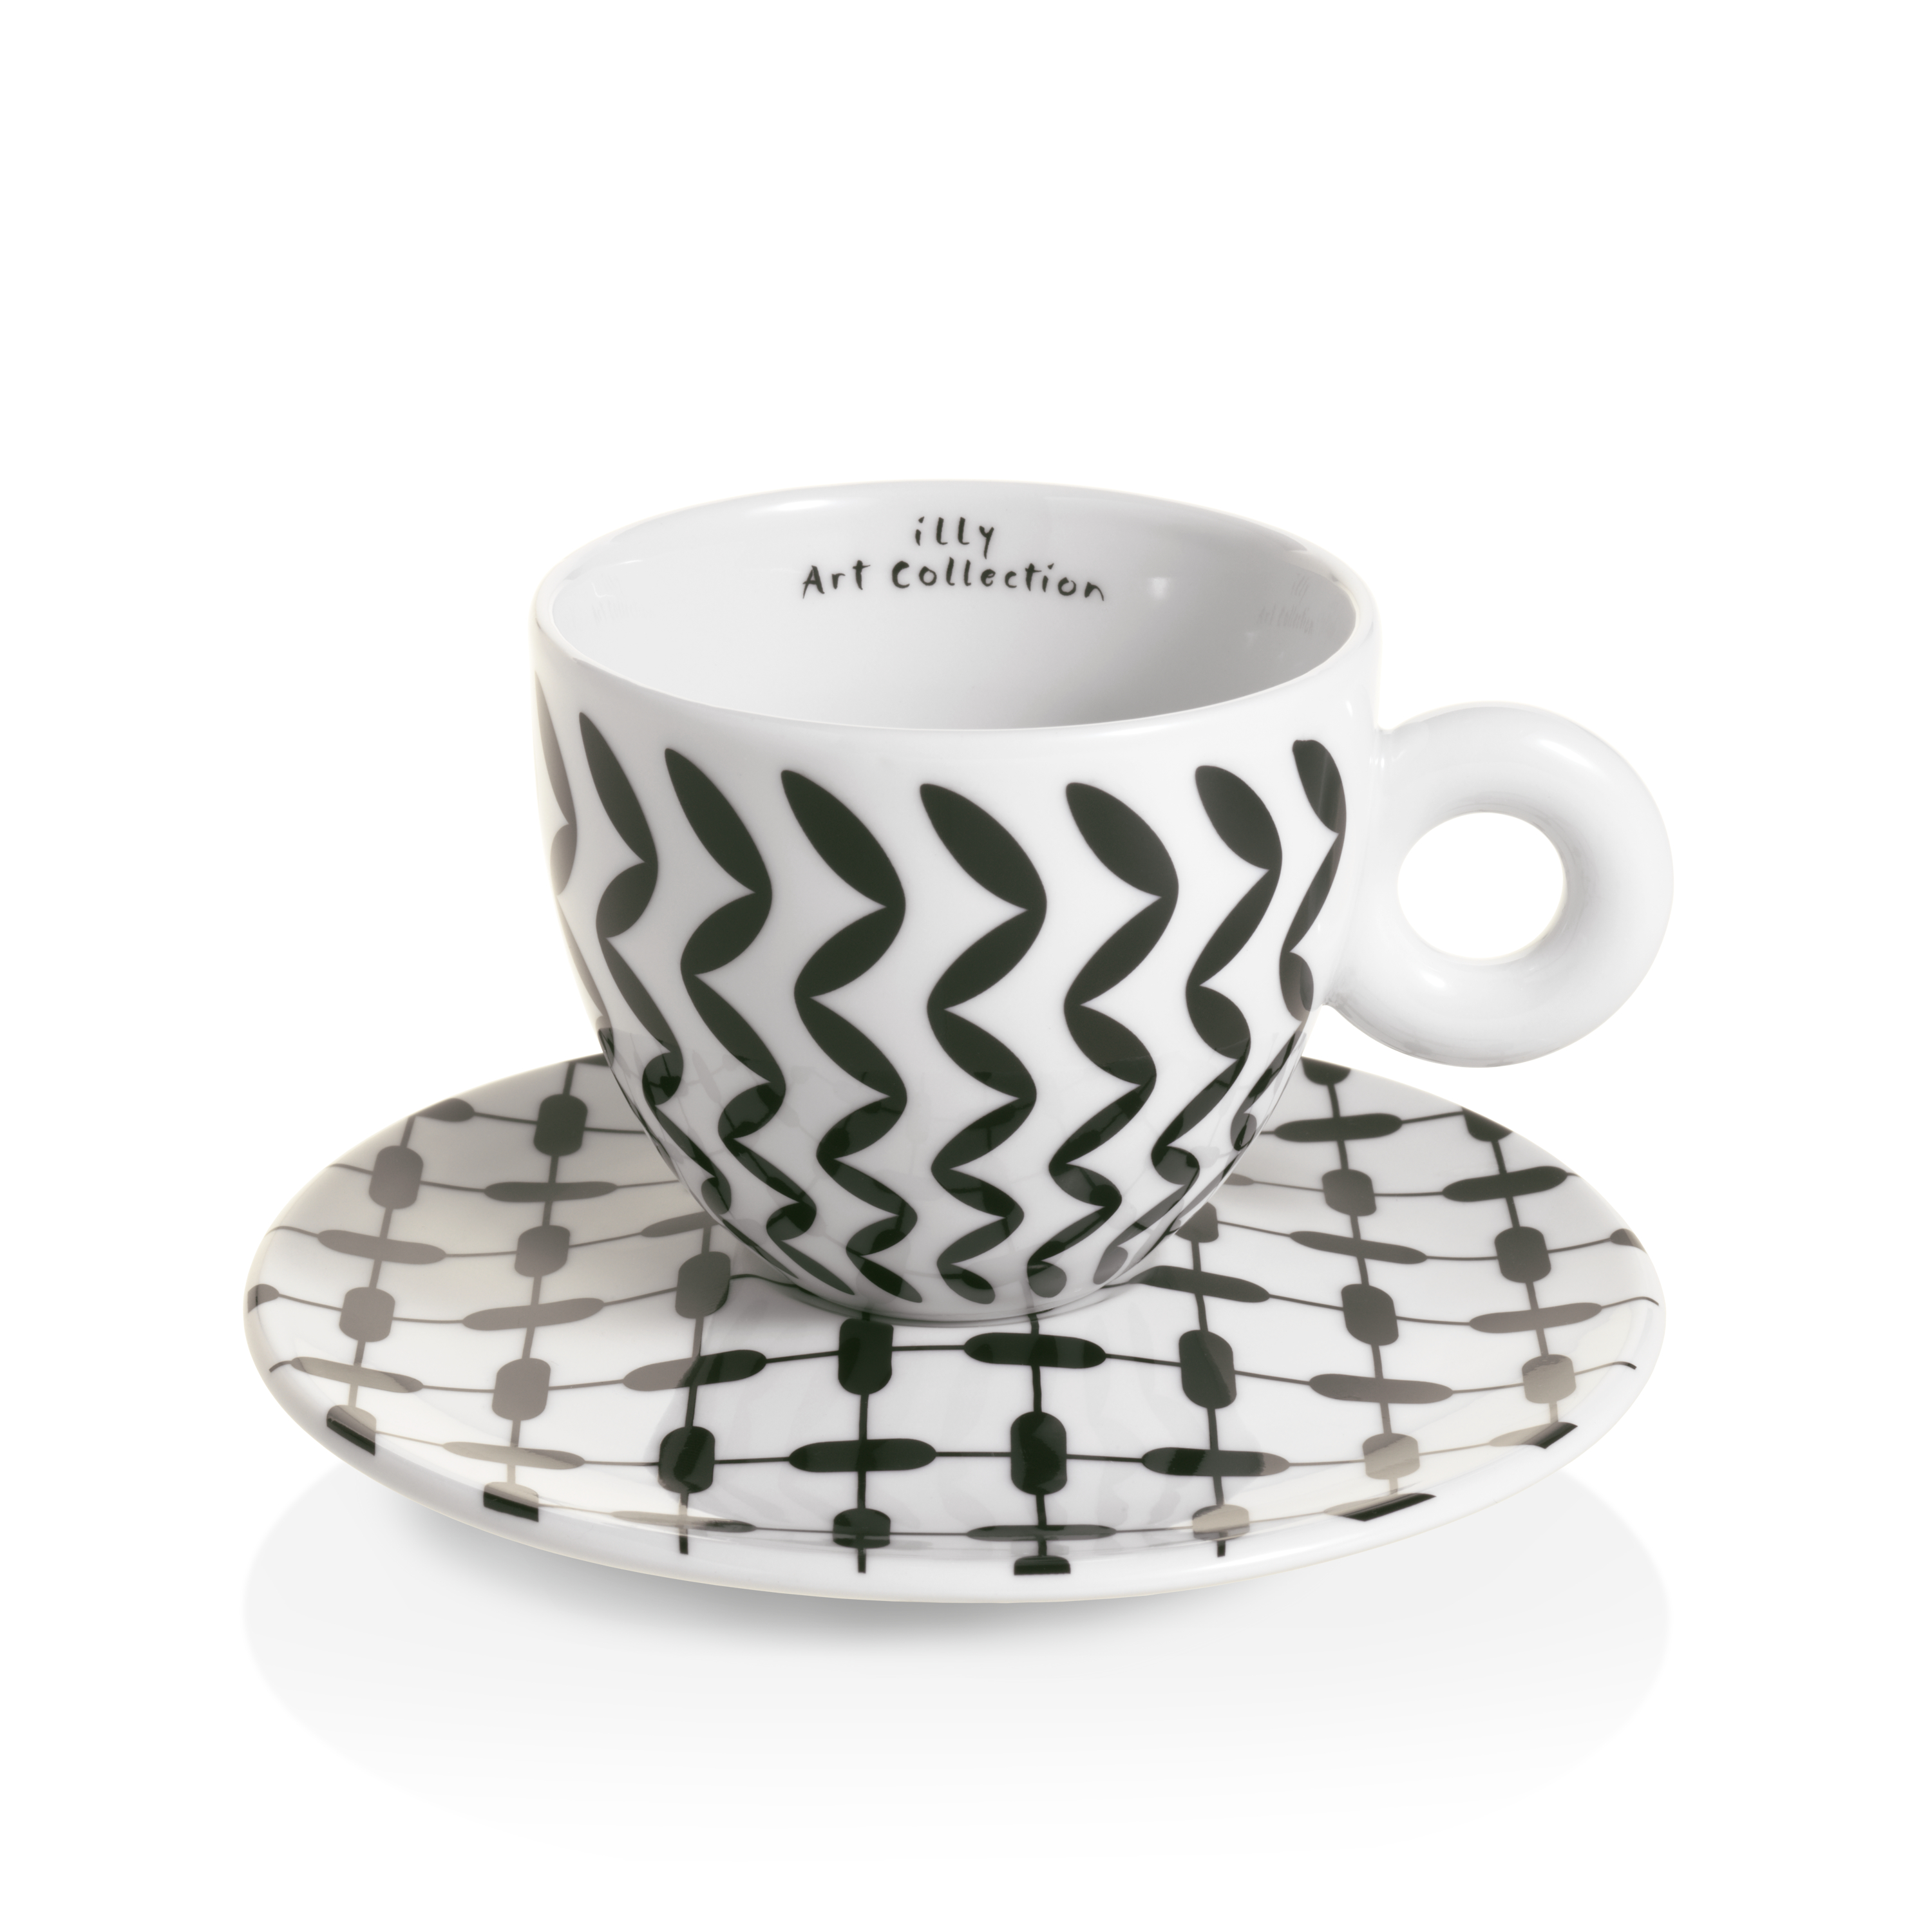 illy Art Collection MONA HATOUM Gift Set 2 Cappuccino Cups, Cups, 02-02-6076